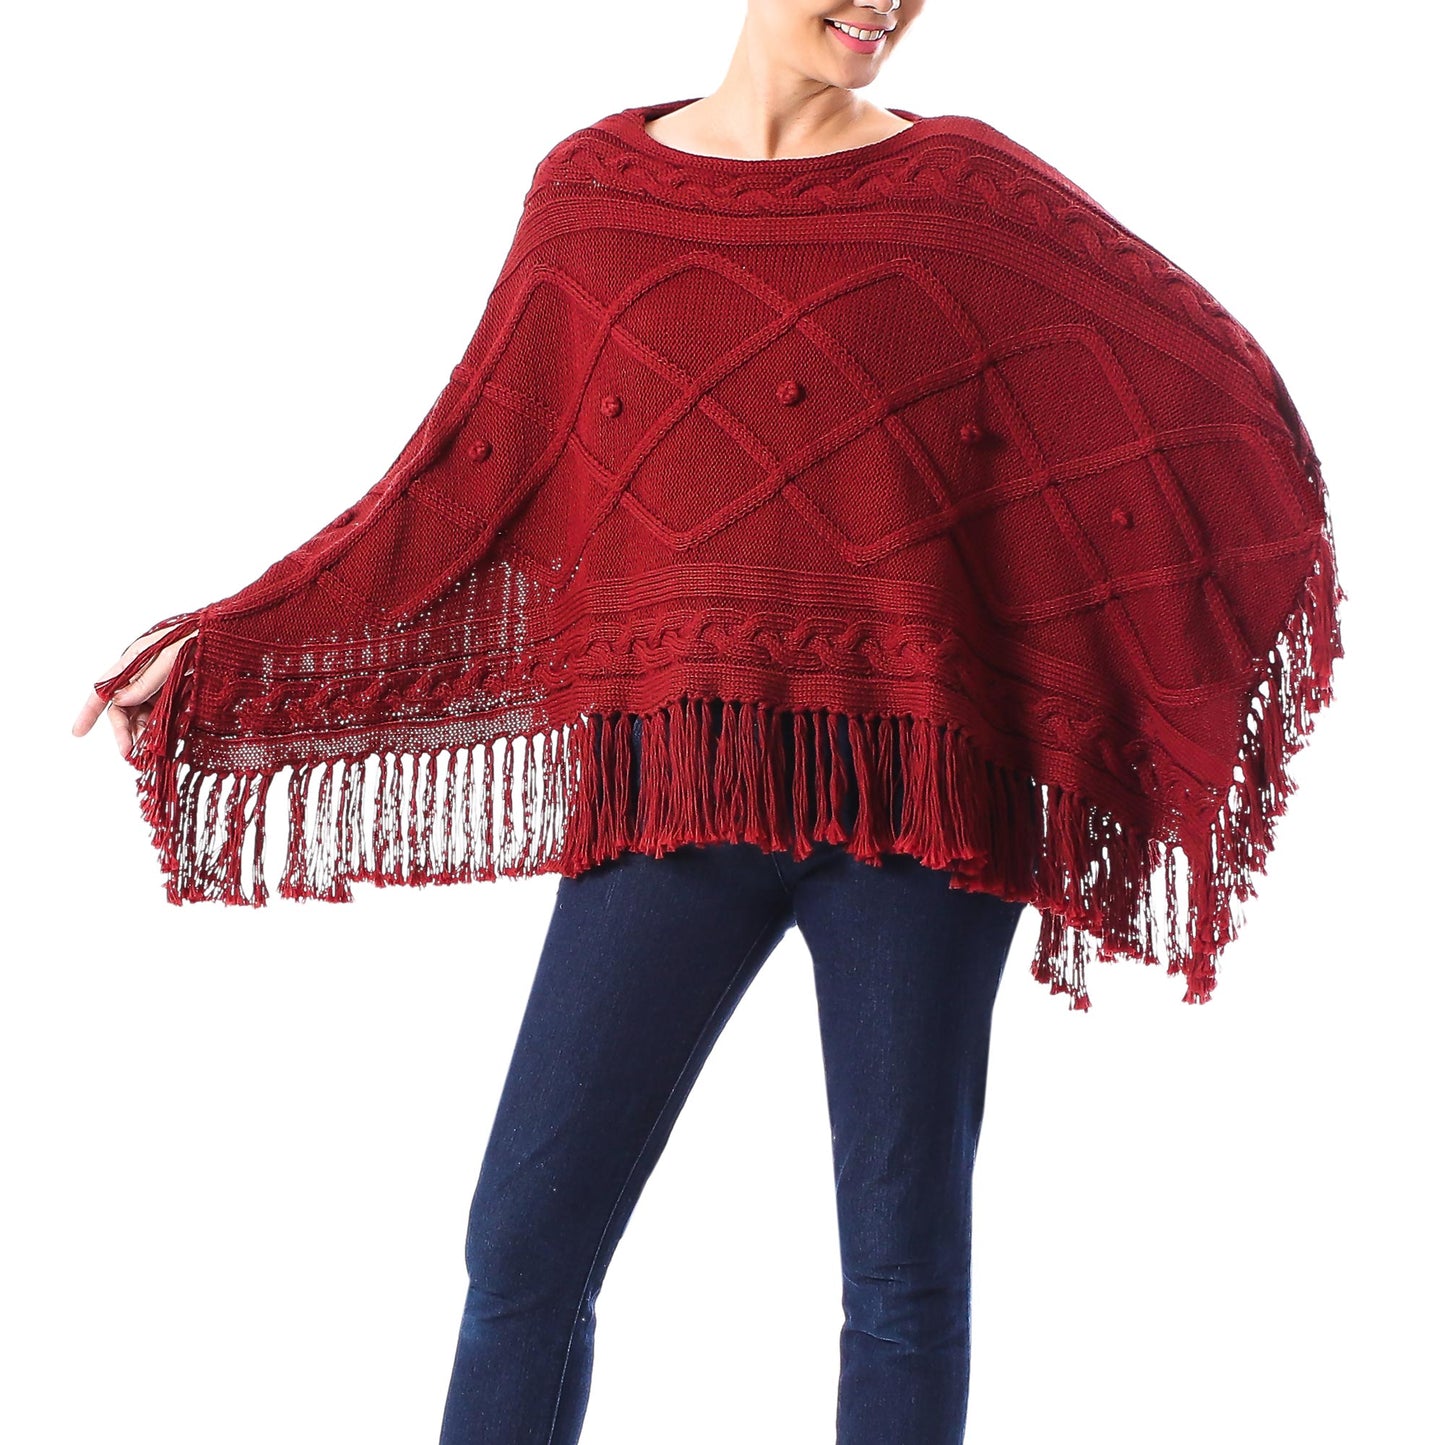 Incredible in Claret Short Knit Poncho in Claret from Thailand